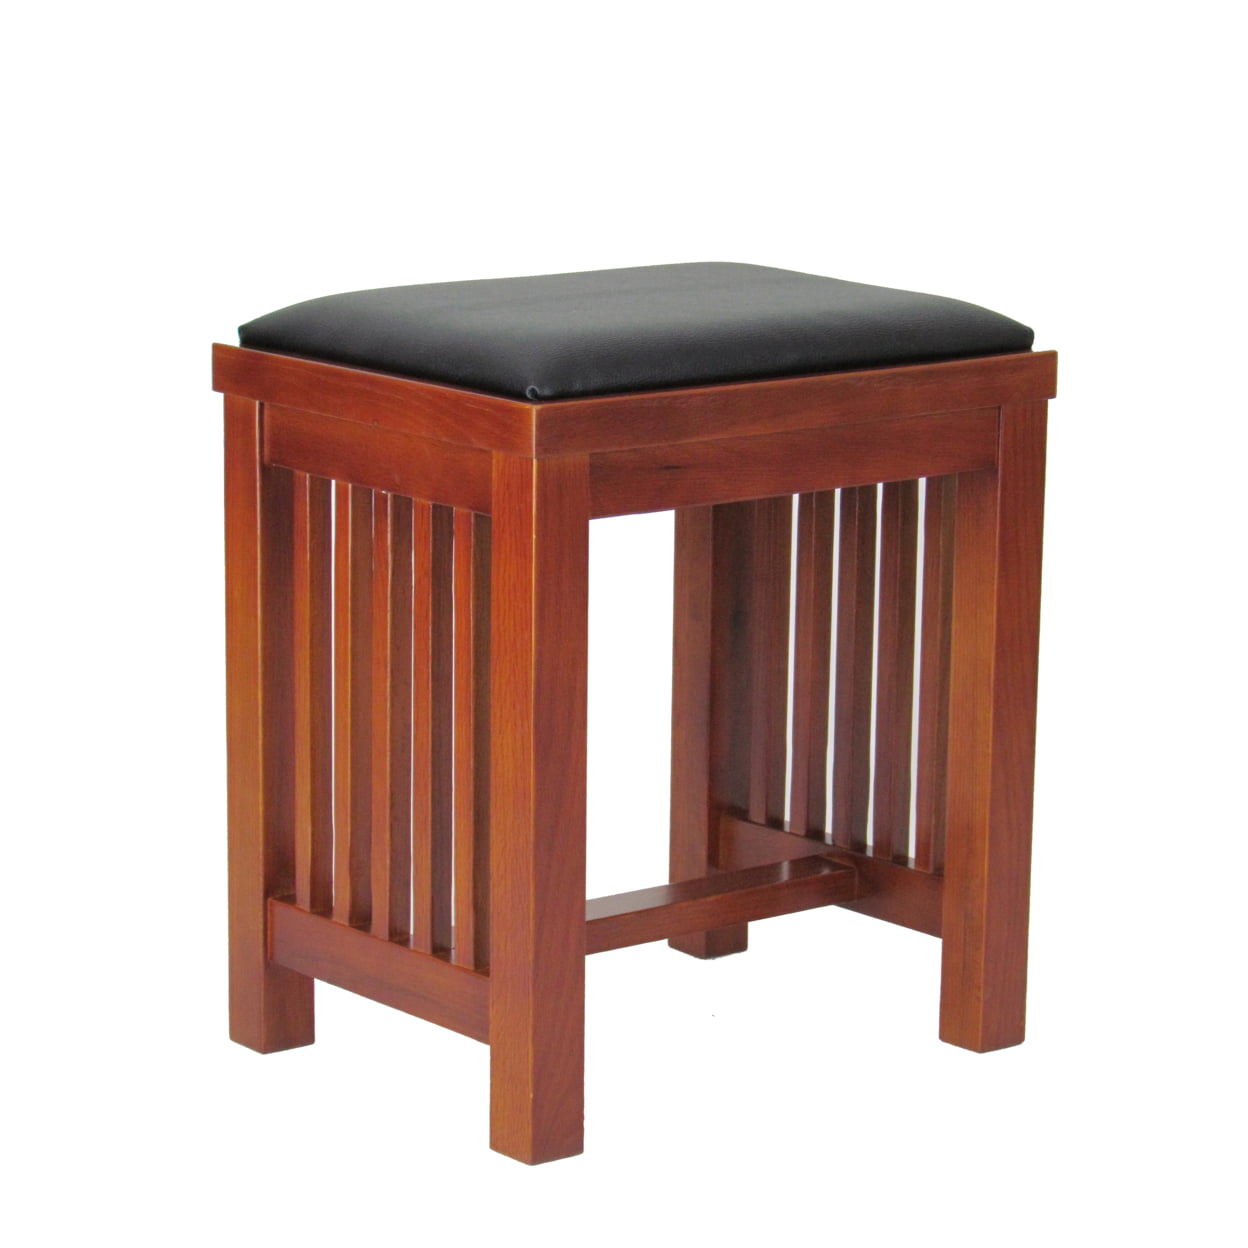 Bm210428 Faux Leather Upholstered Mission Wooden Stool With Slatted Sides, Brown